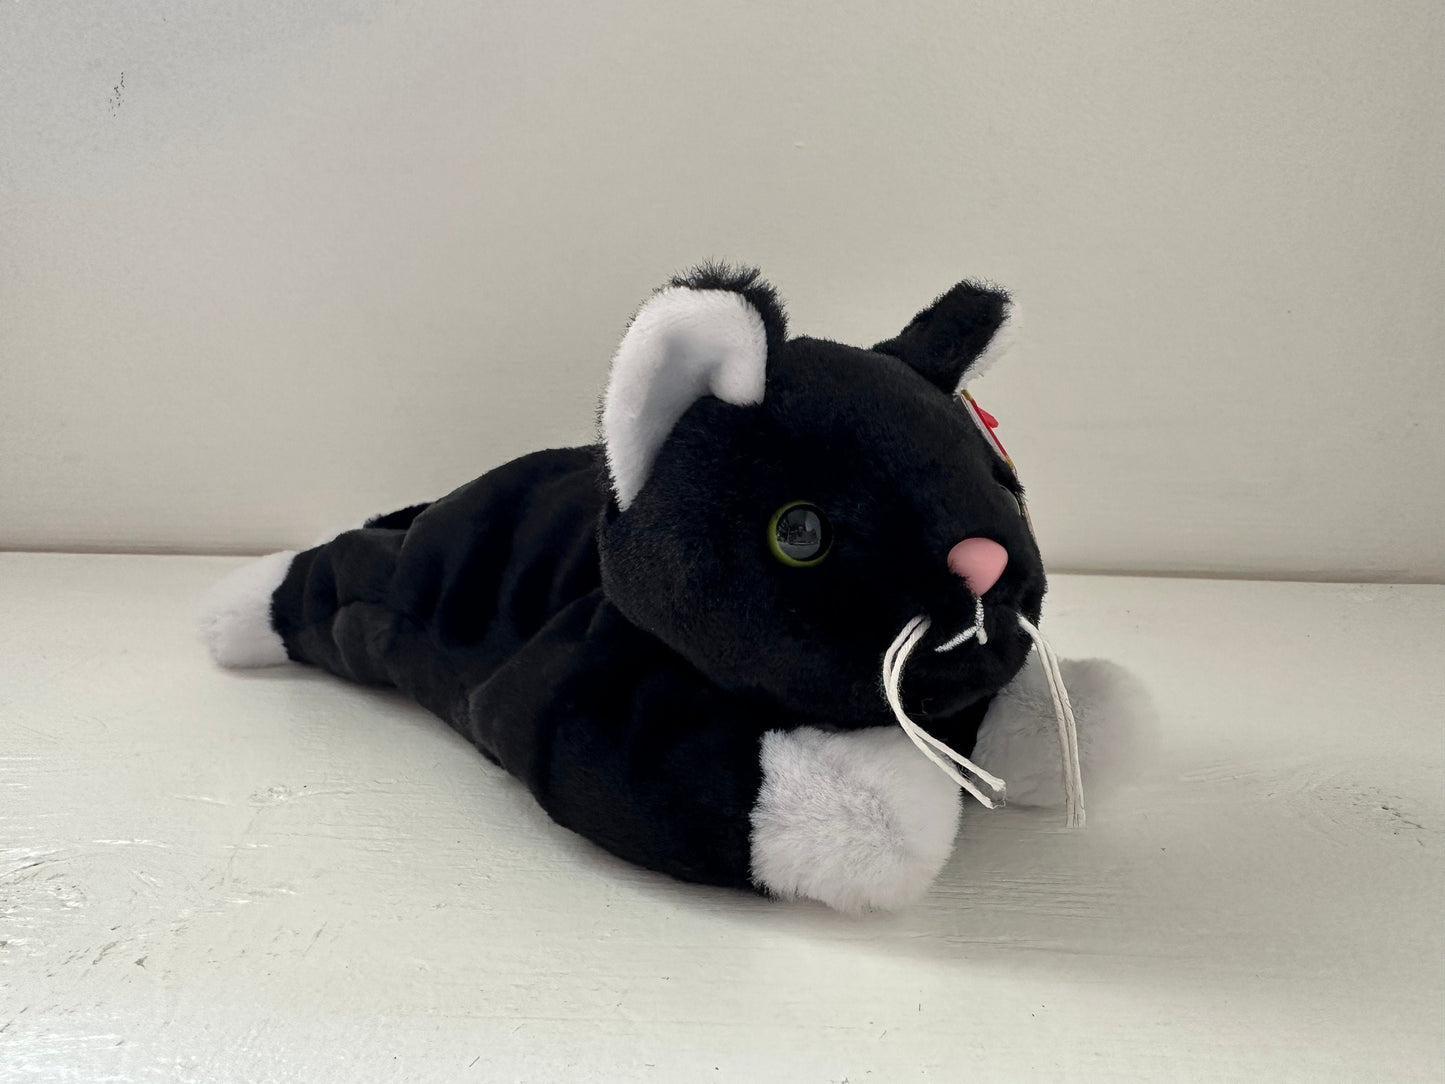 Ty Beanie Baby Zip II the Black Cat - Limited Production Rare! 30th Anniversary Beanie Baby Series! (6 inch)